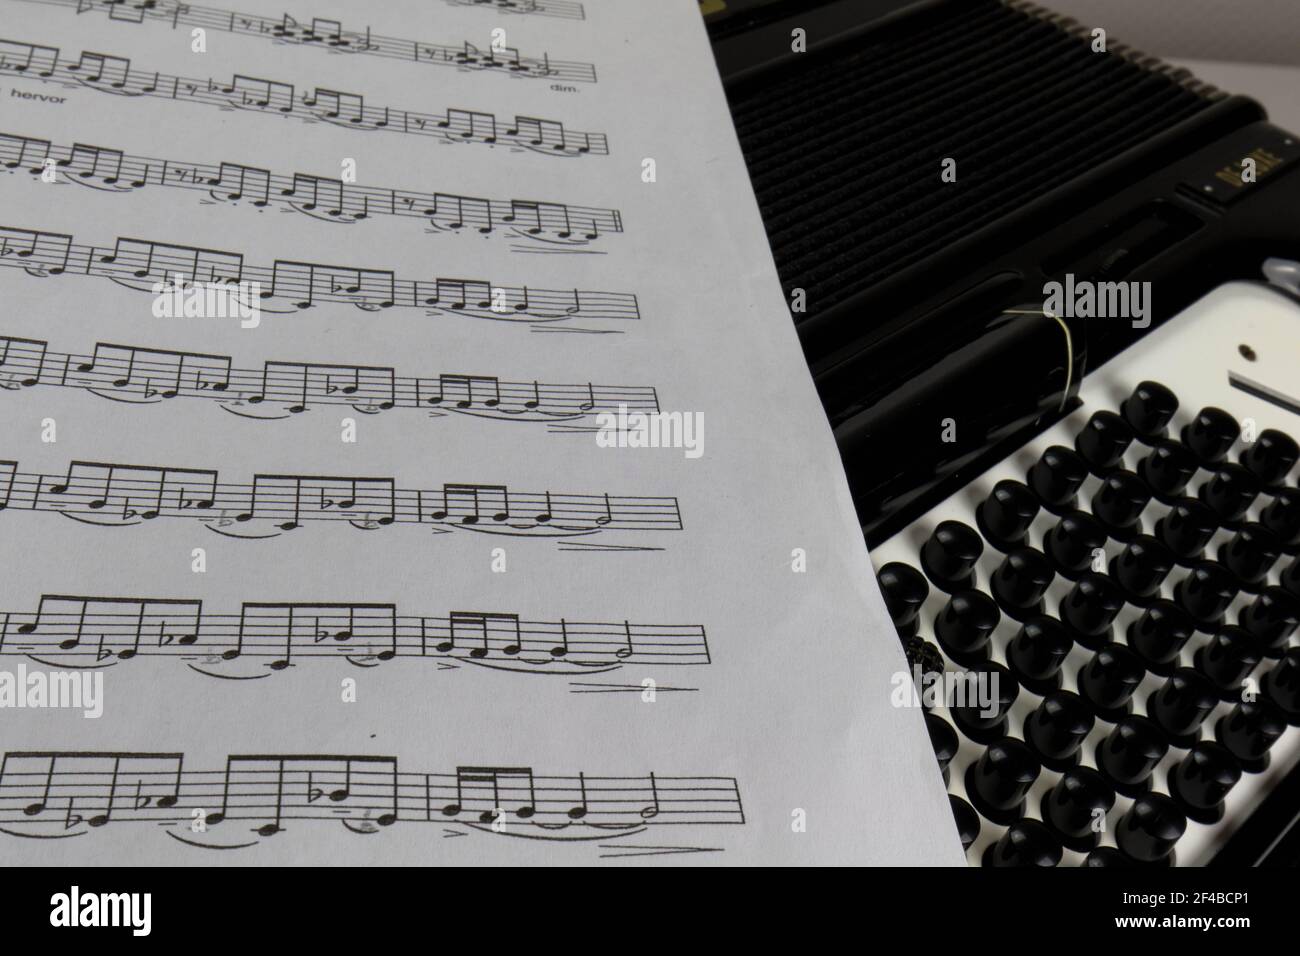 White and black accordion with music notes. Keys and buttons close up Stock Photo